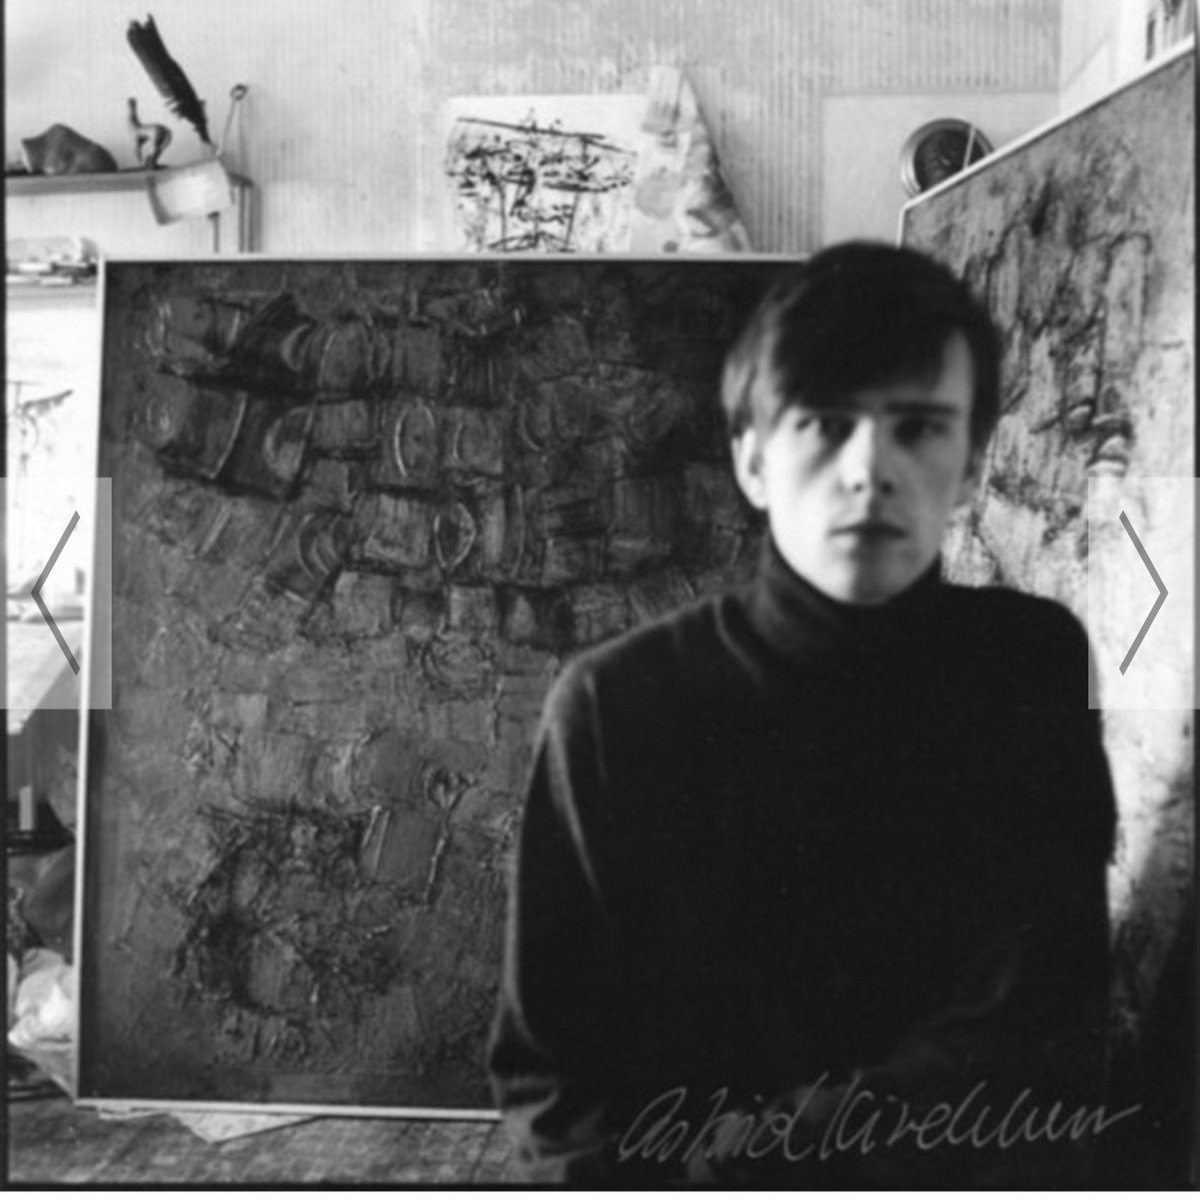 The life & times of the art & style of #StuartSutcliffe @AnOtherMagazine bit.ly/3NHMMXi
Trending Today...artists continue to push boundaries and combine genres… Stuart, ahead of his time? Rediscover the legend @SutcliffeEstate bit.ly/3GkyPdK 
#AllYouNeedXXX